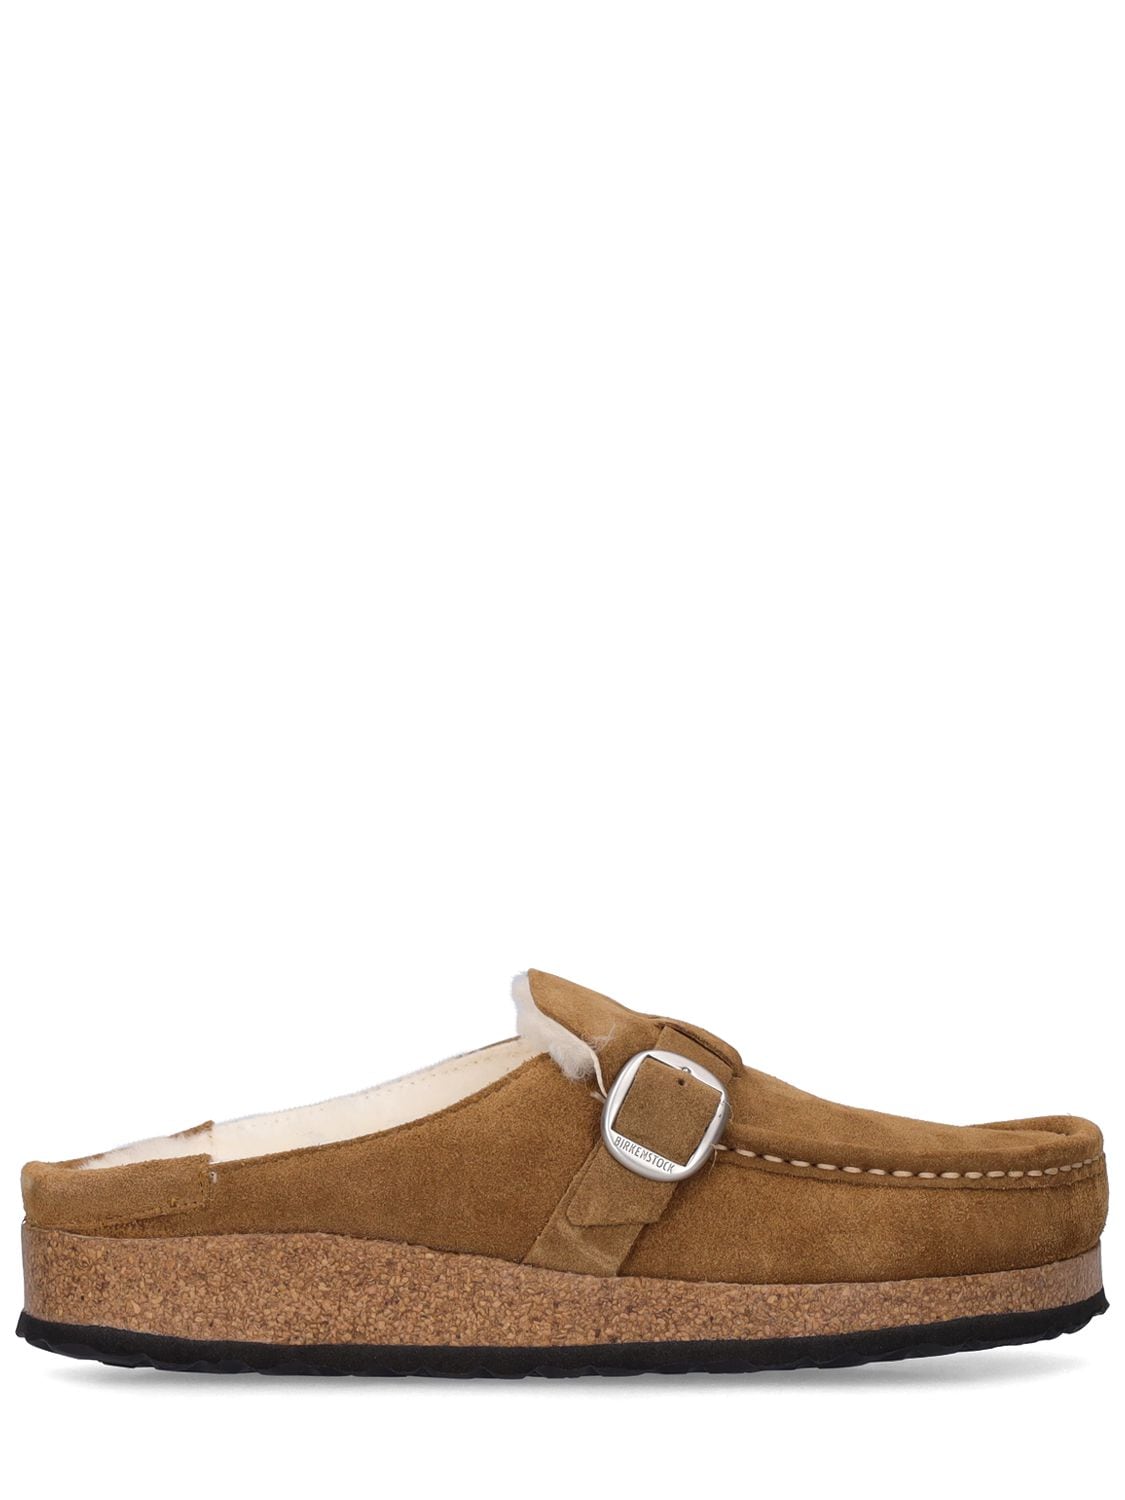 Buckley Shearling & Suede Loafers